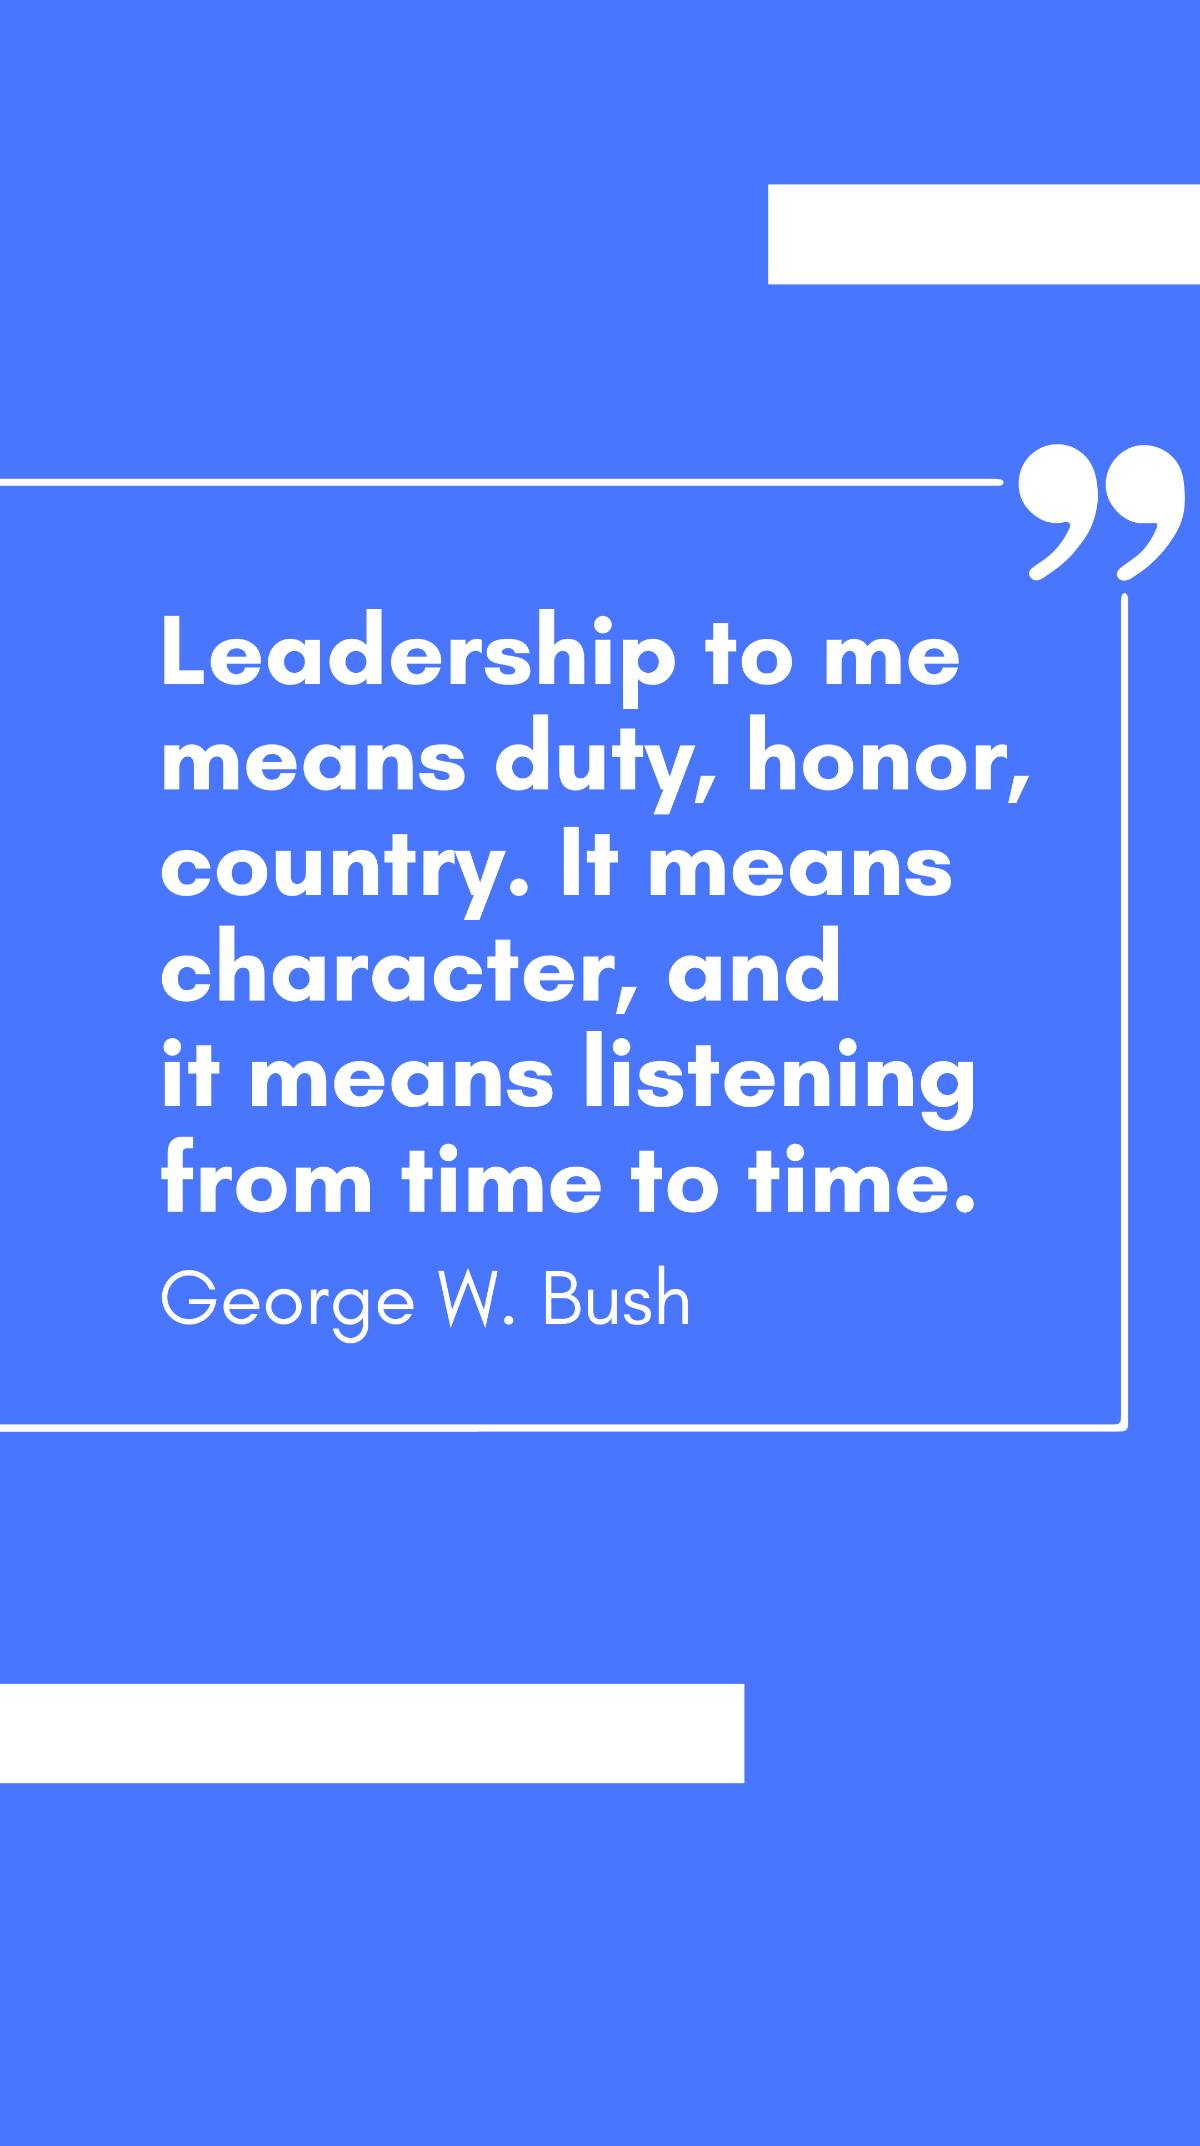 George W. Bush - Leadership to me means duty, honor, country. It means character, and it means listening from time to time. Template